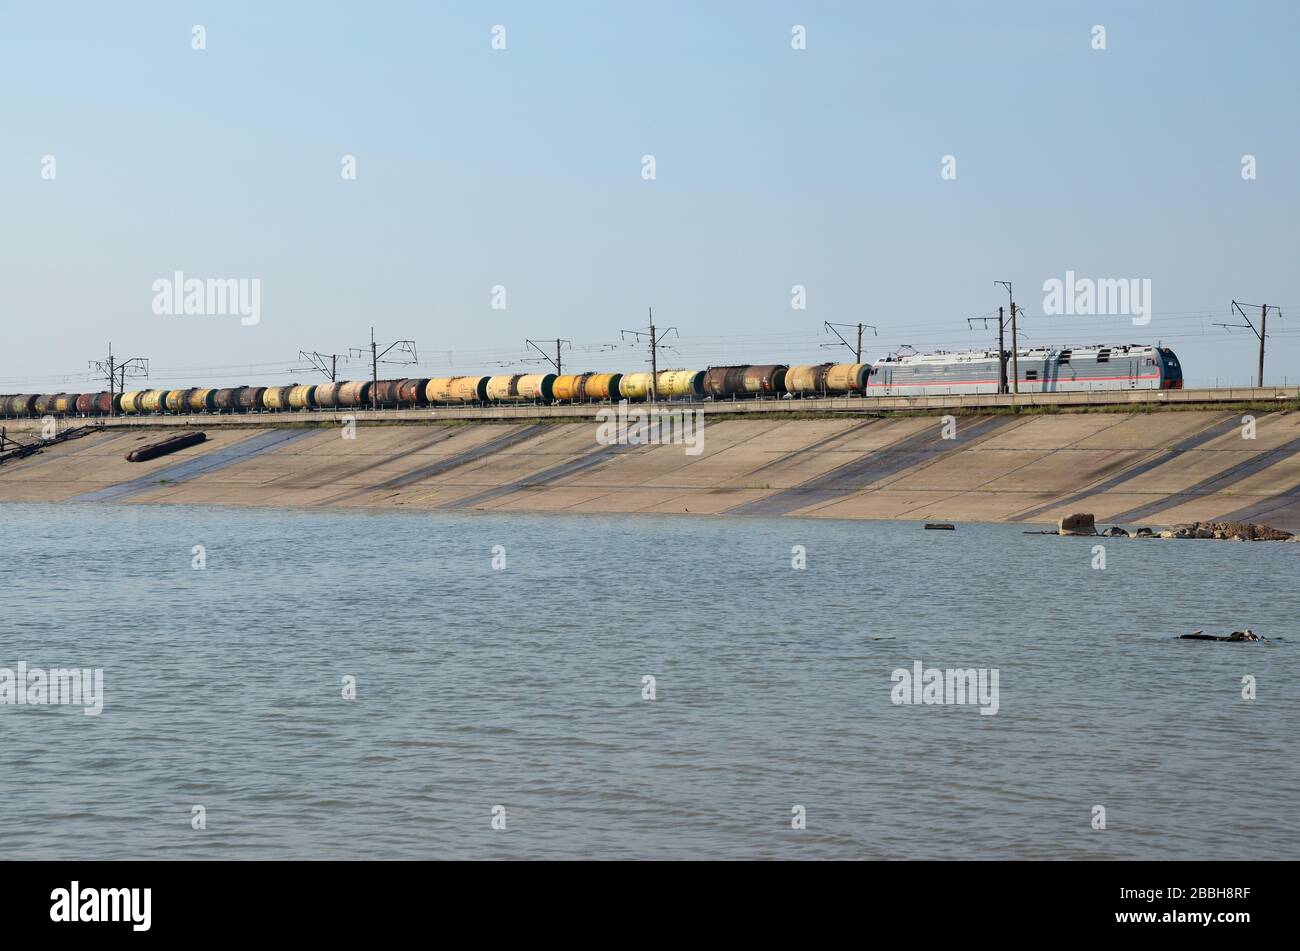 An electrical locomotive with oil tanker wagons on the hydroelectric dam of Bratsk, Russia. This the BAM railway line, Baikal Amour Magistral. Stock Photo